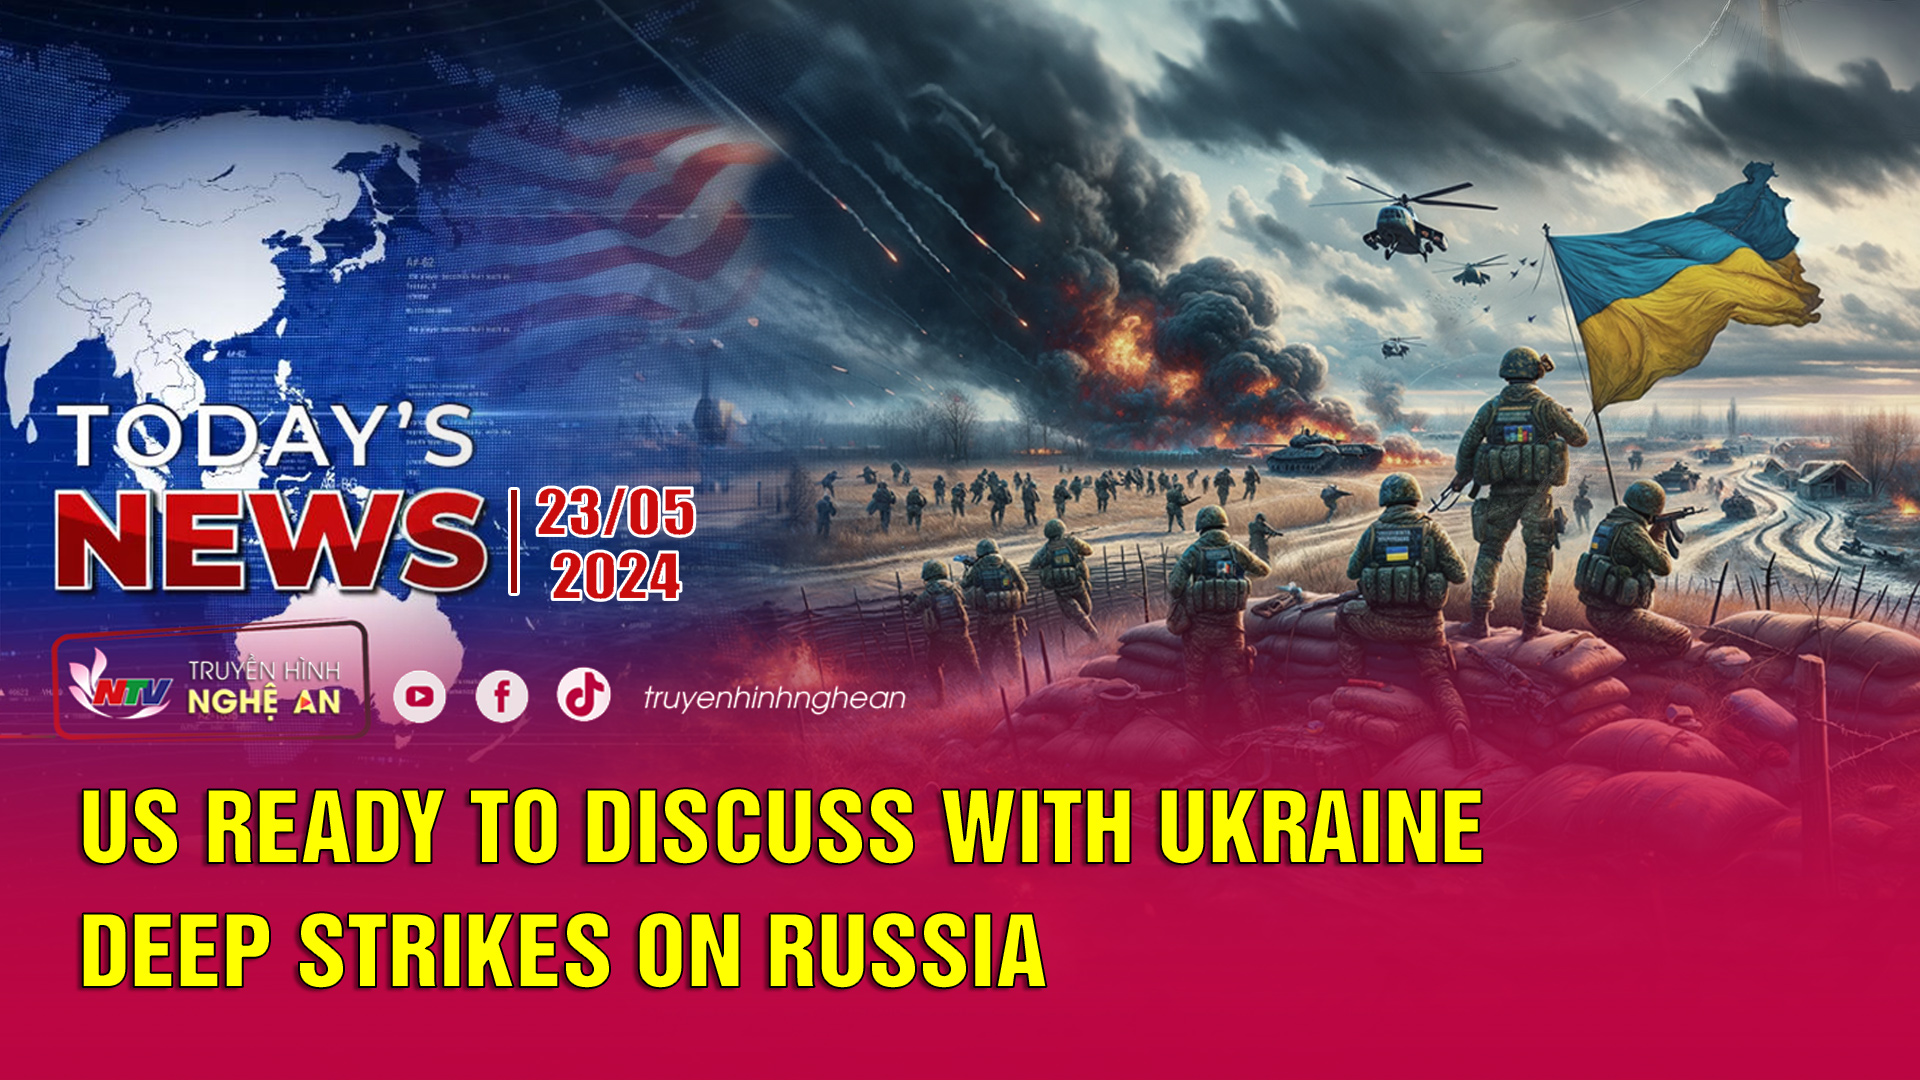 Today's News 23/05/2024: US ready to discuss with Ukraine deep strikes on Russia